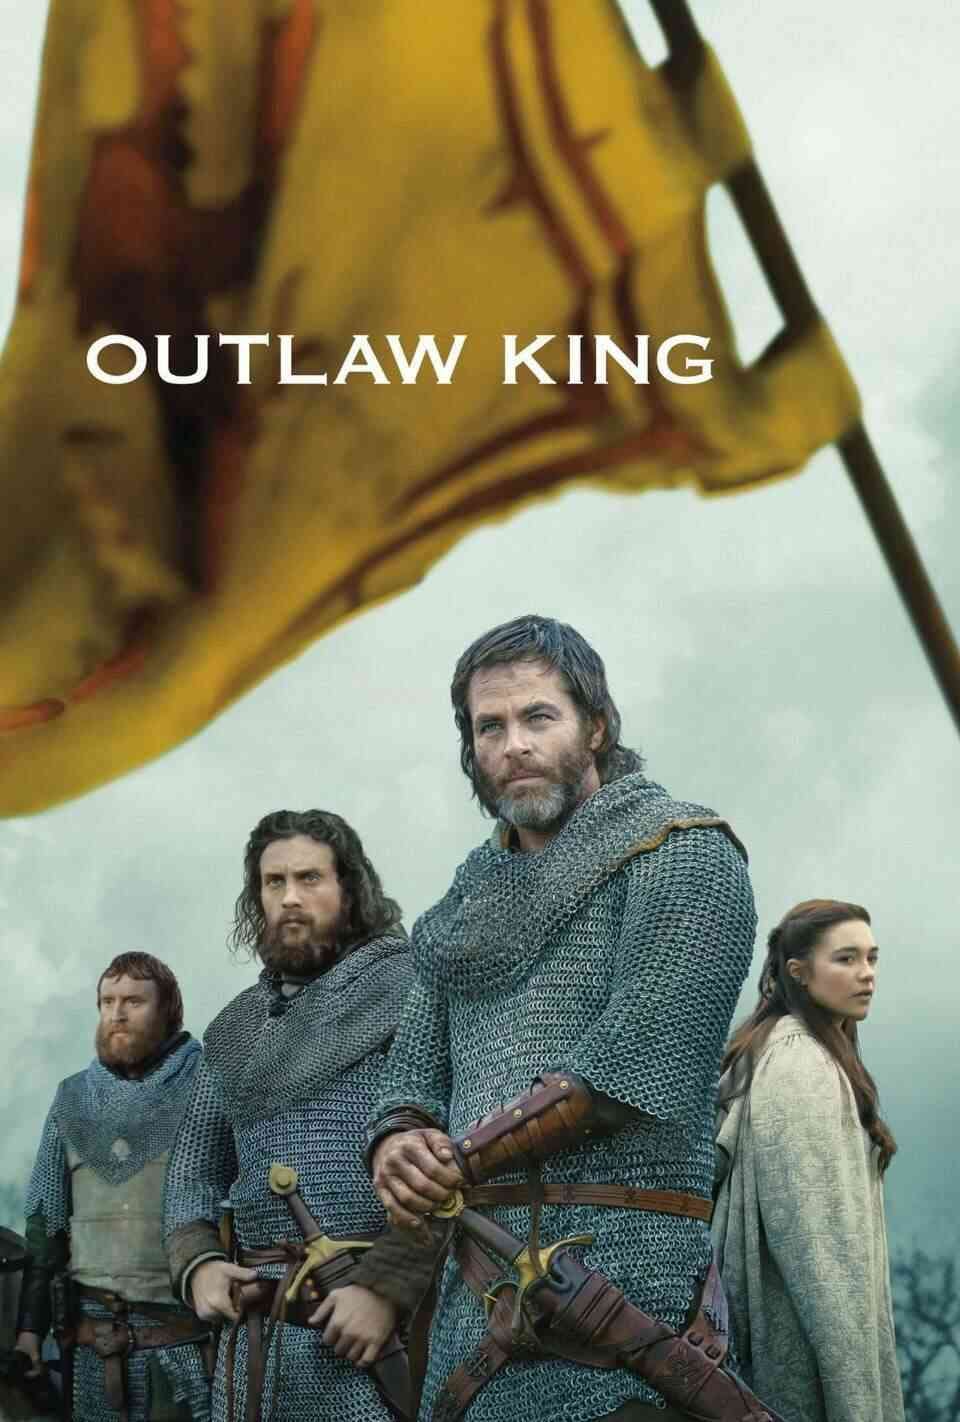 Read Outlaw King screenplay (poster)